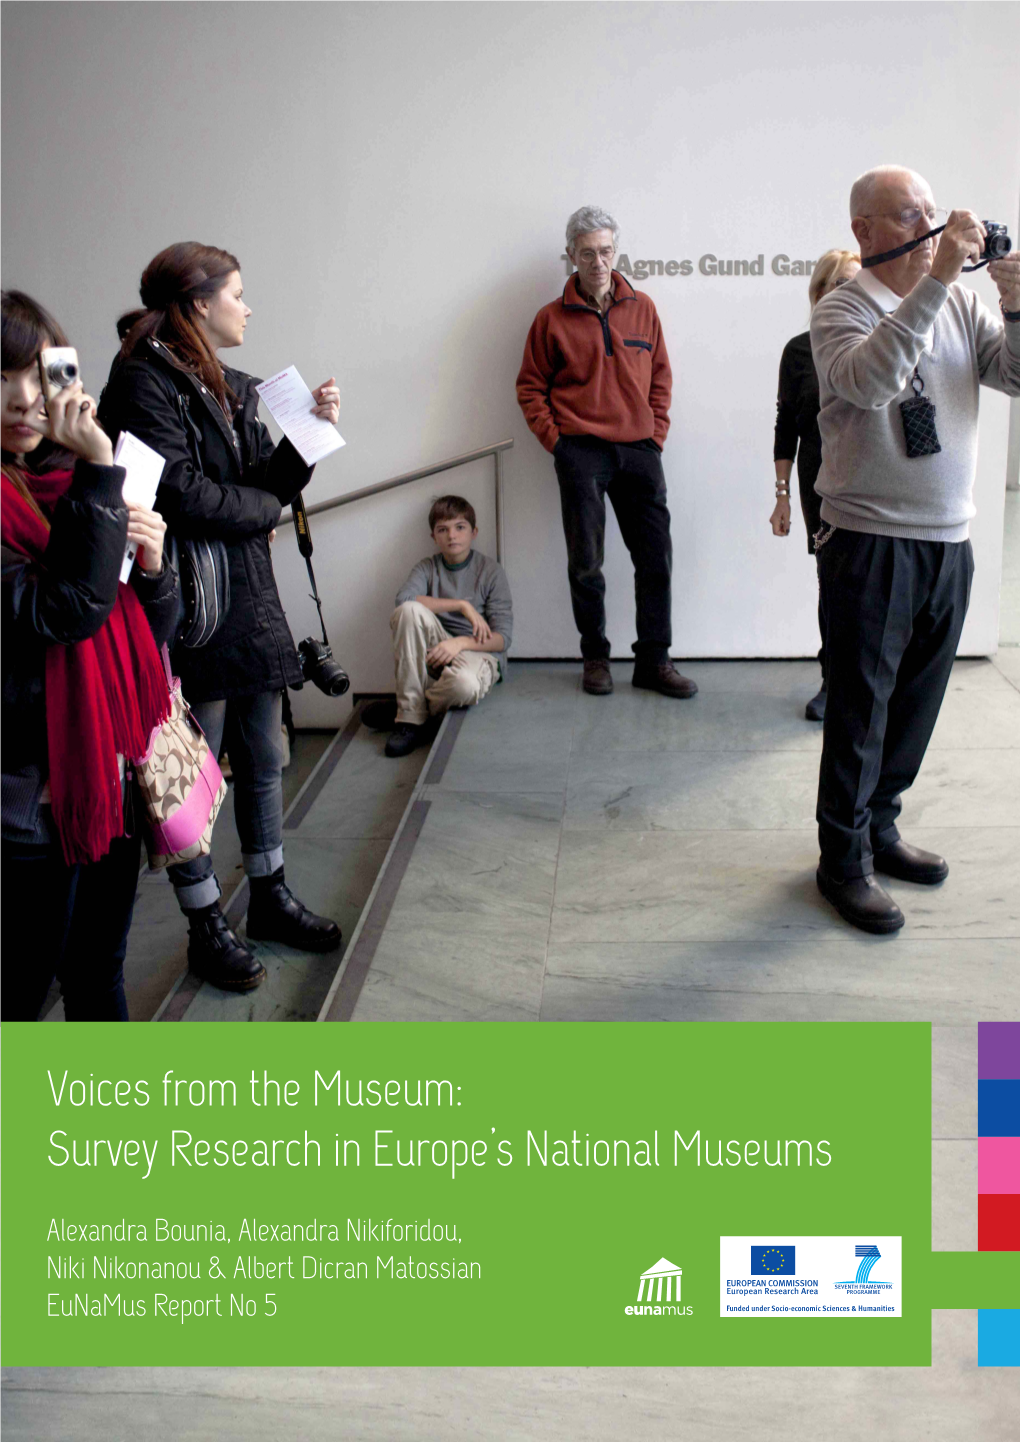 Voices from the Museum: Survey Research in Europe's National